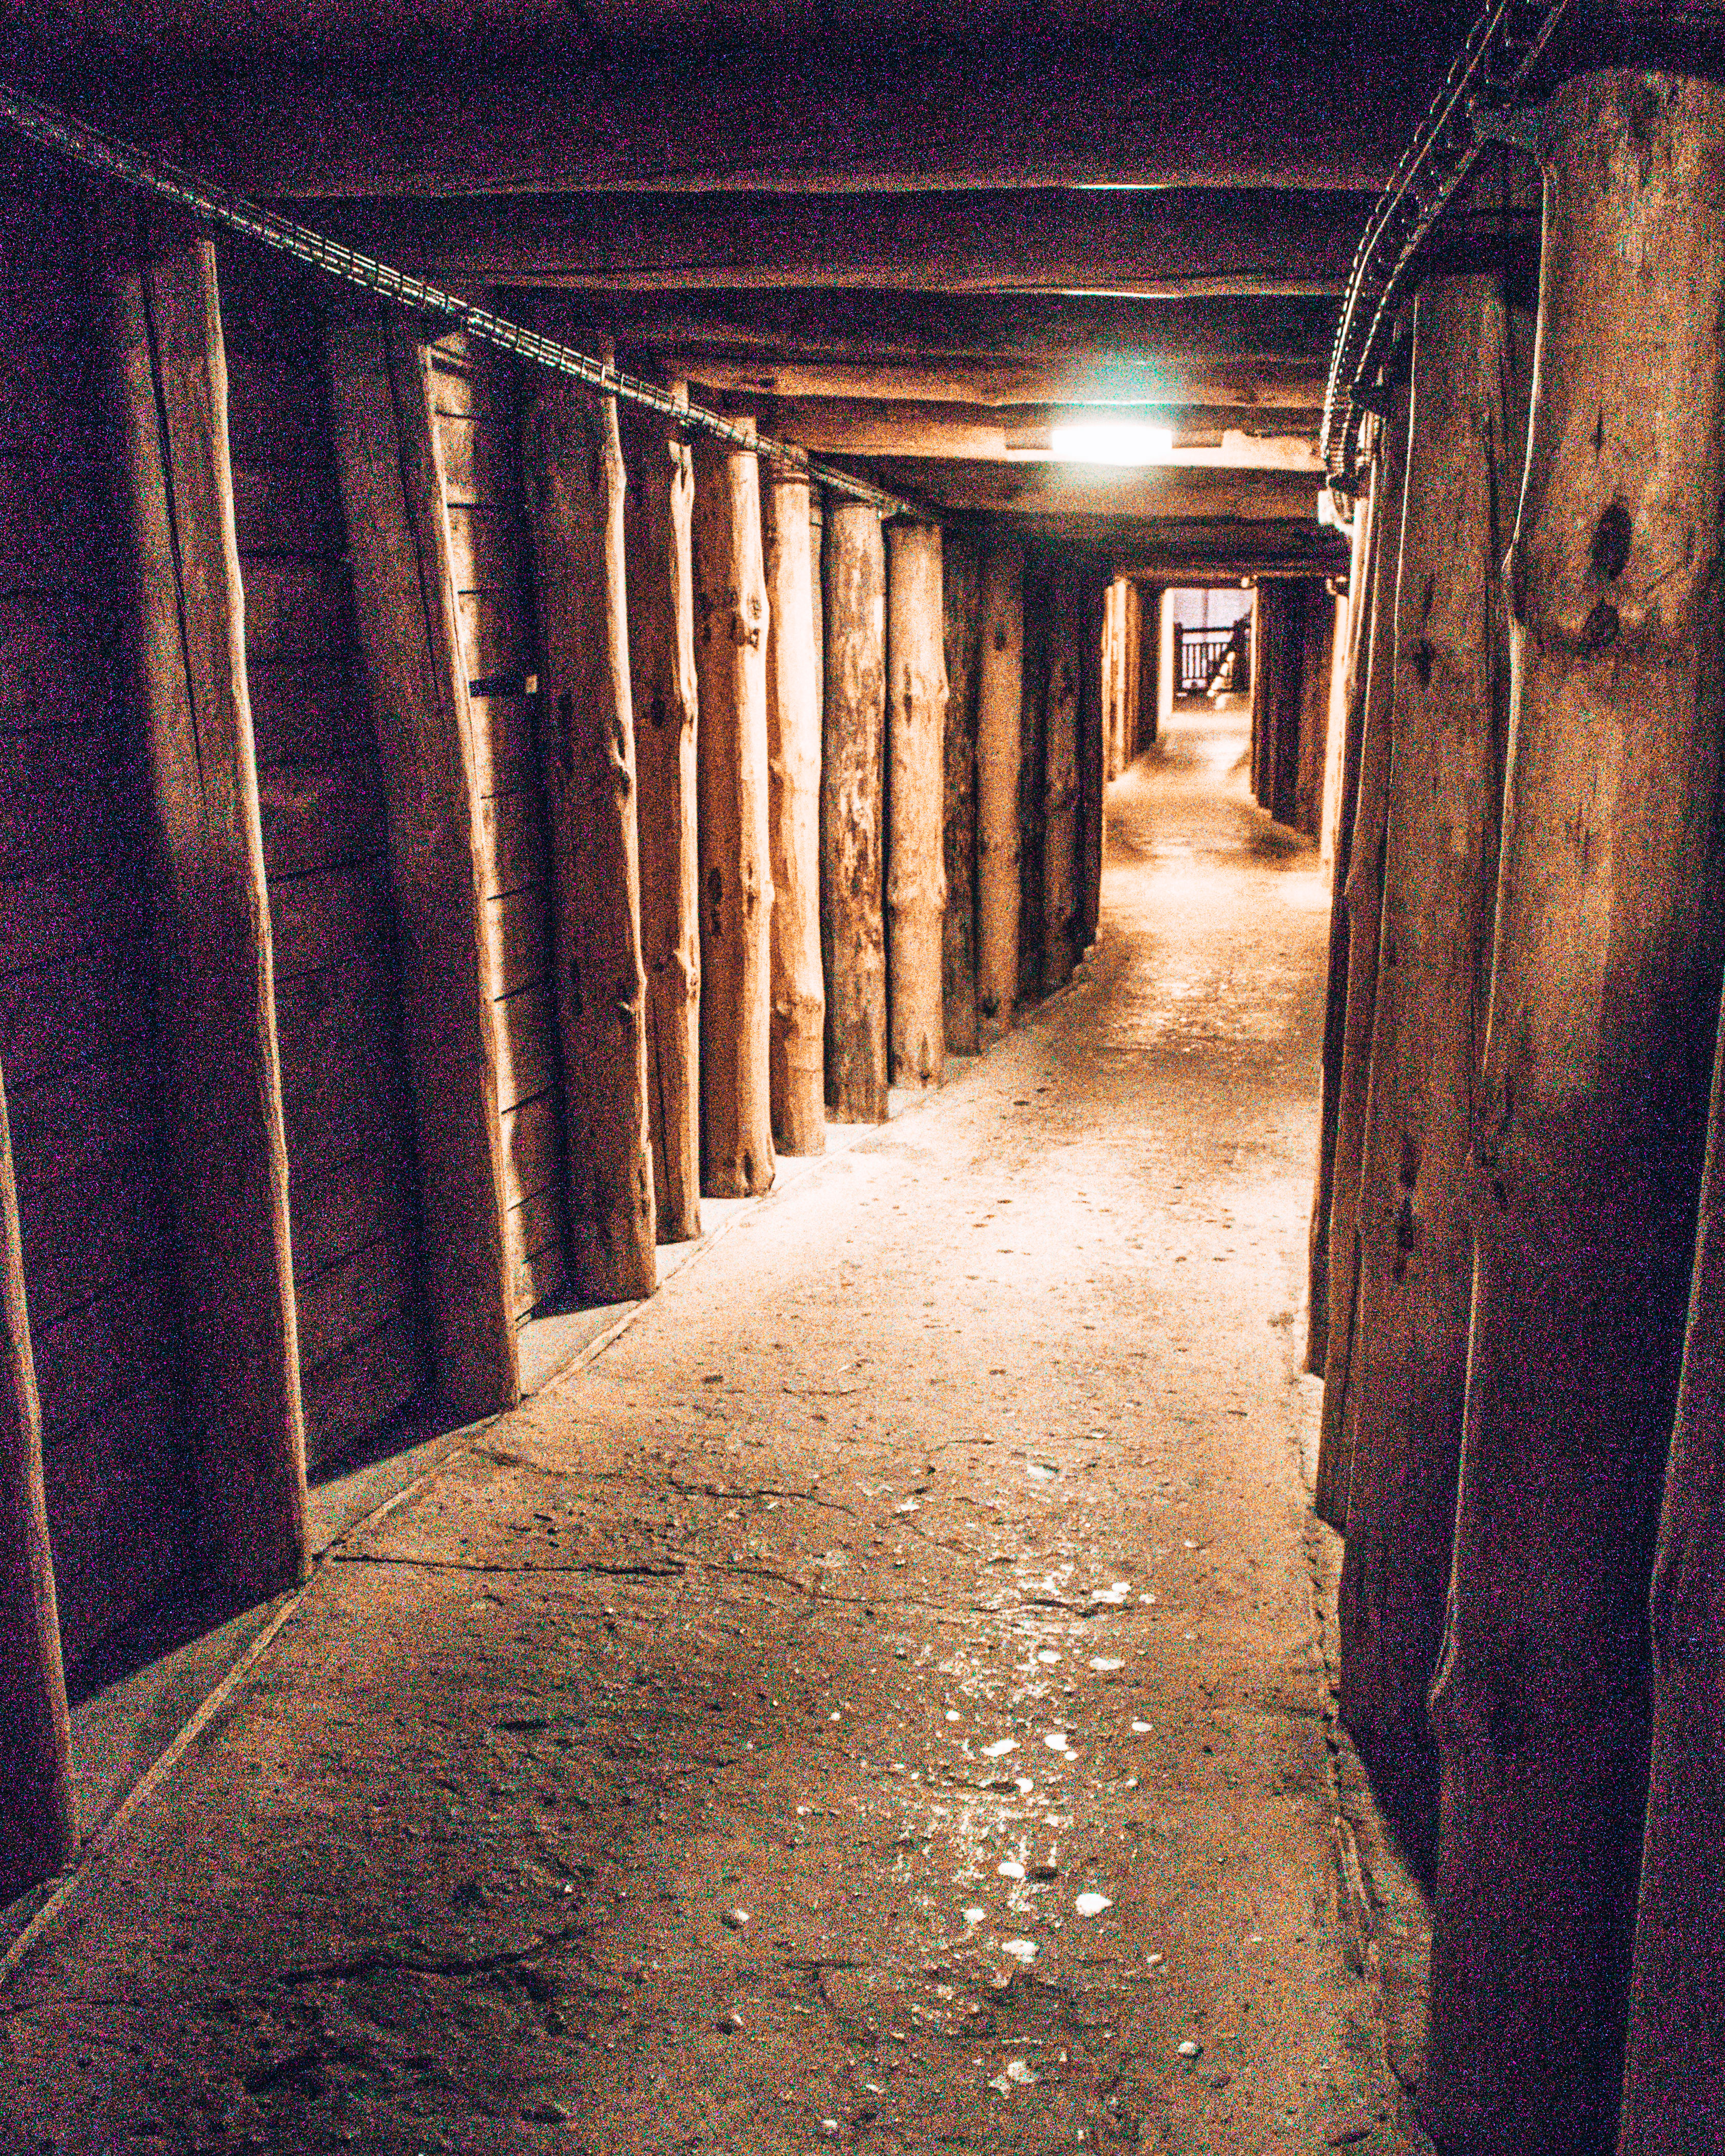 One of hundreds of passages in the Wielicska salt mines in Wieliczka, Poland